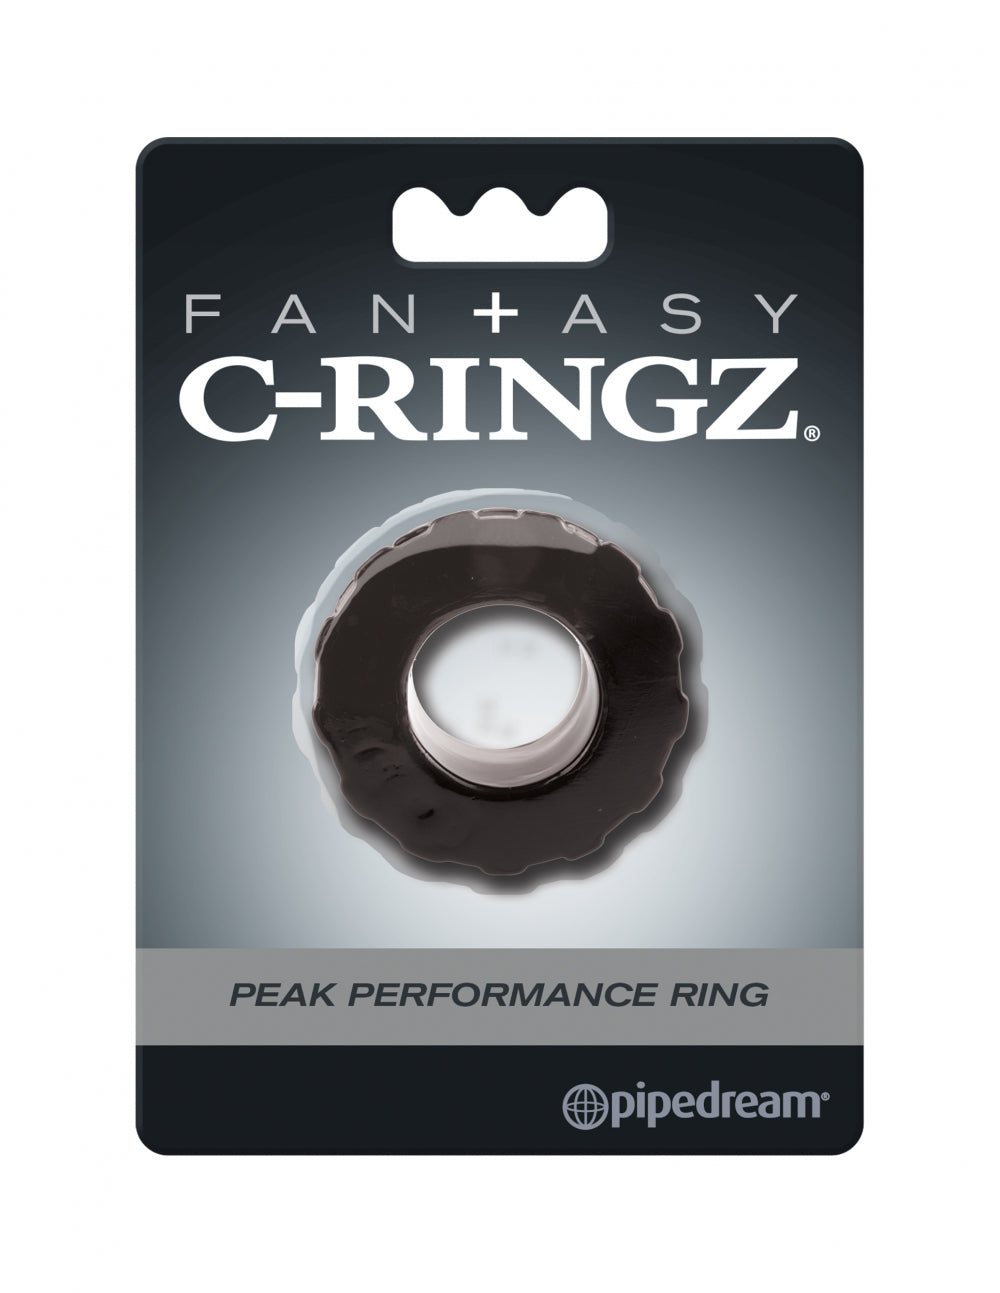 Peak Performance Ring by Pipedream